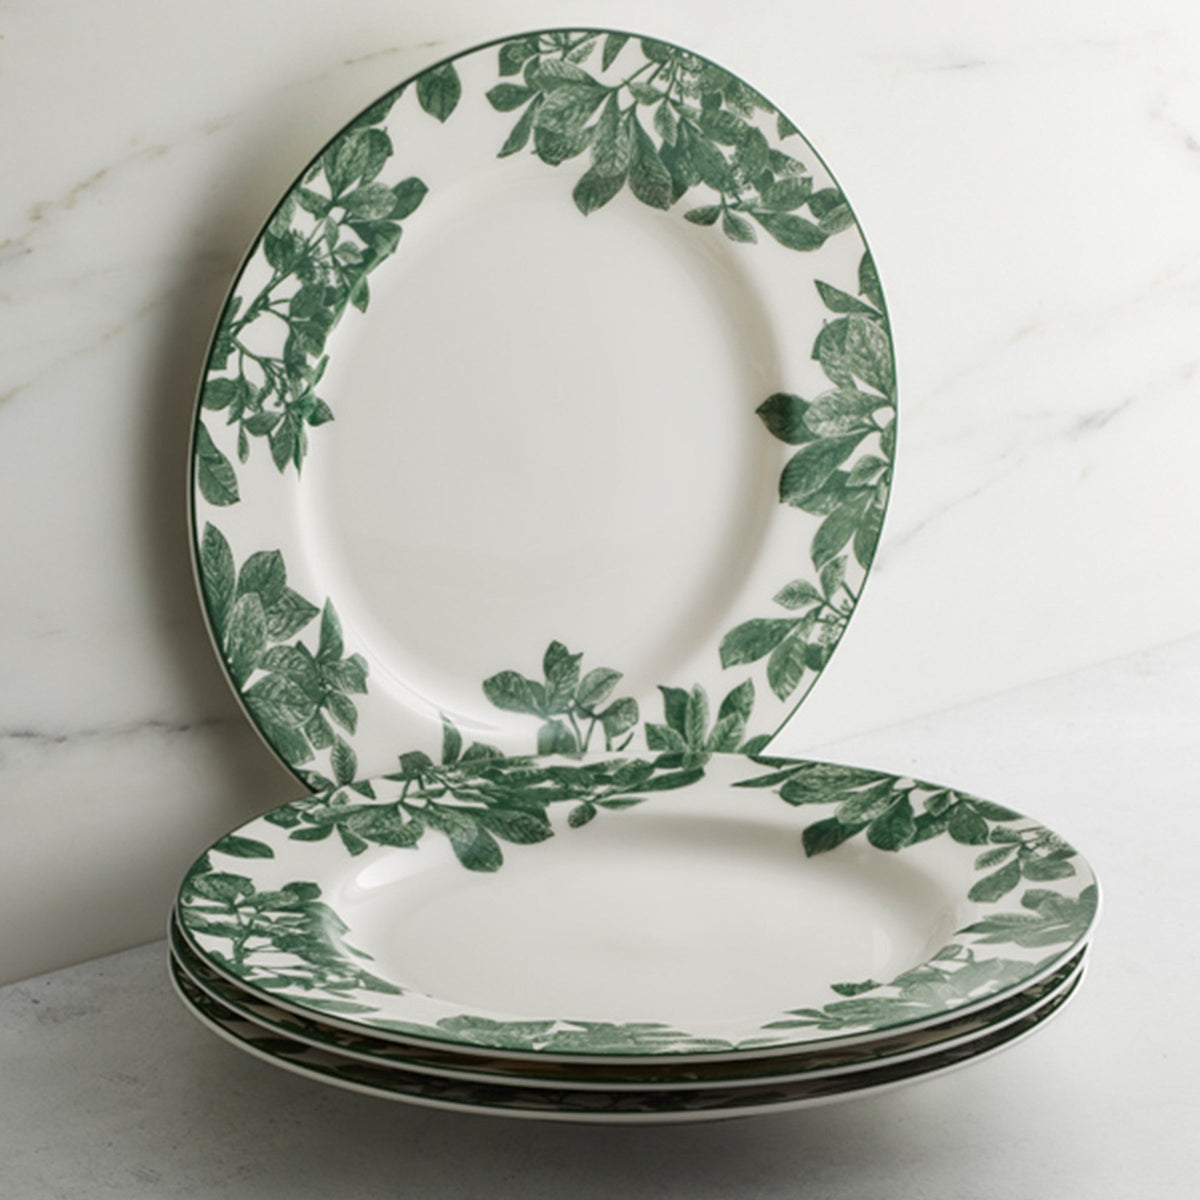 A set of Arbor Green Dinner Plates with delicate leaves on premium porcelain by Caskata.